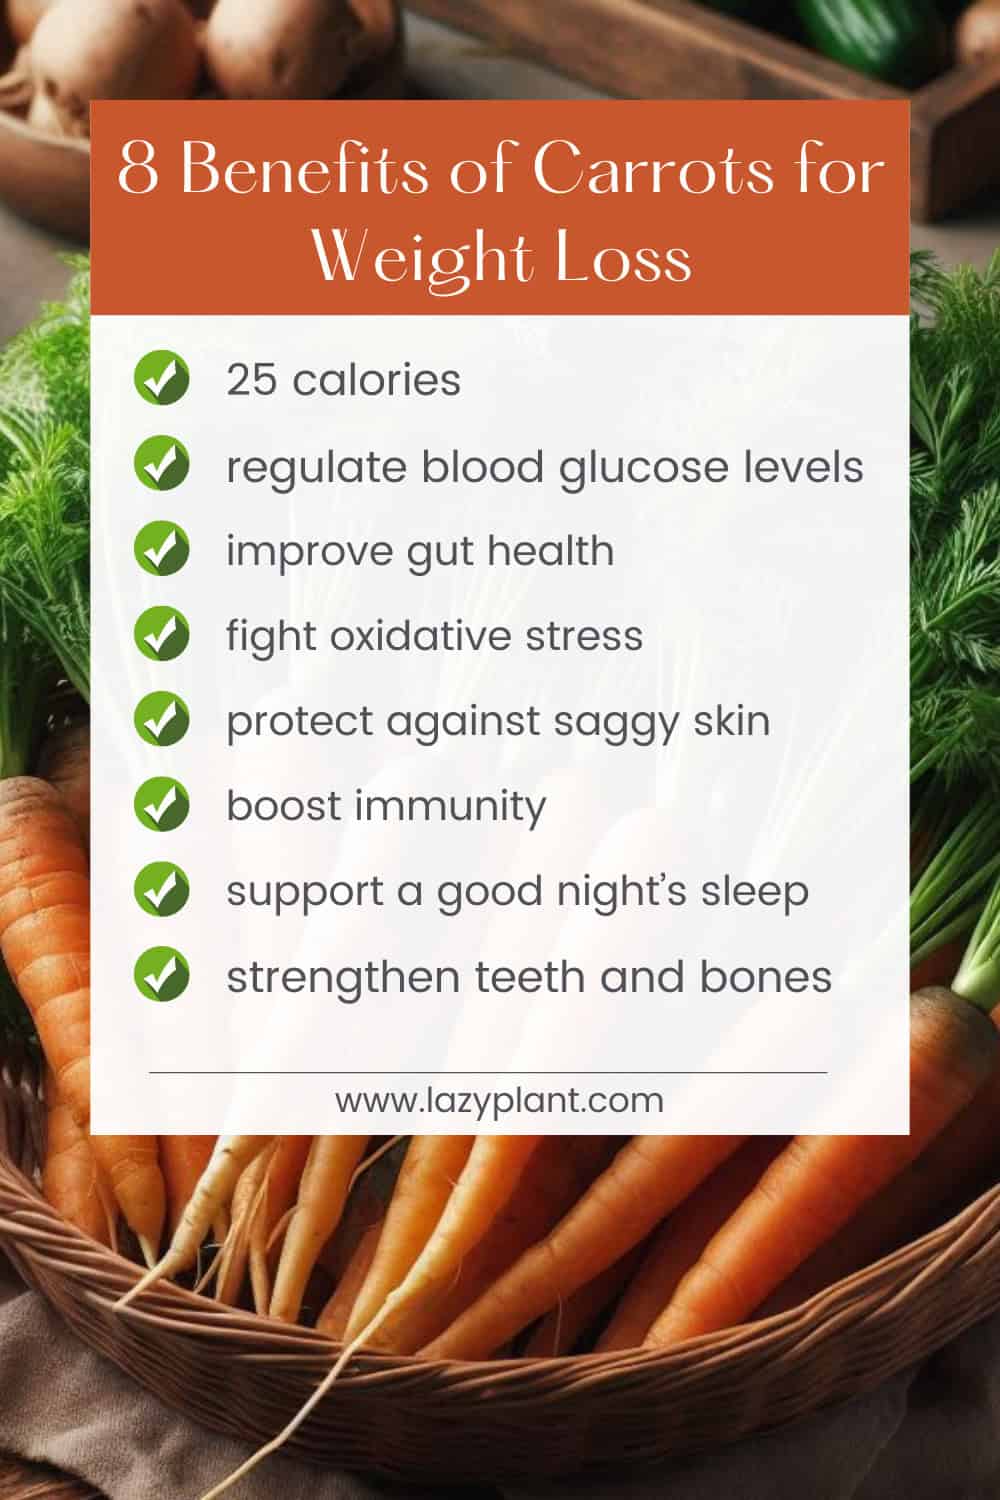 8 Benefits of Carrots for Weight Loss